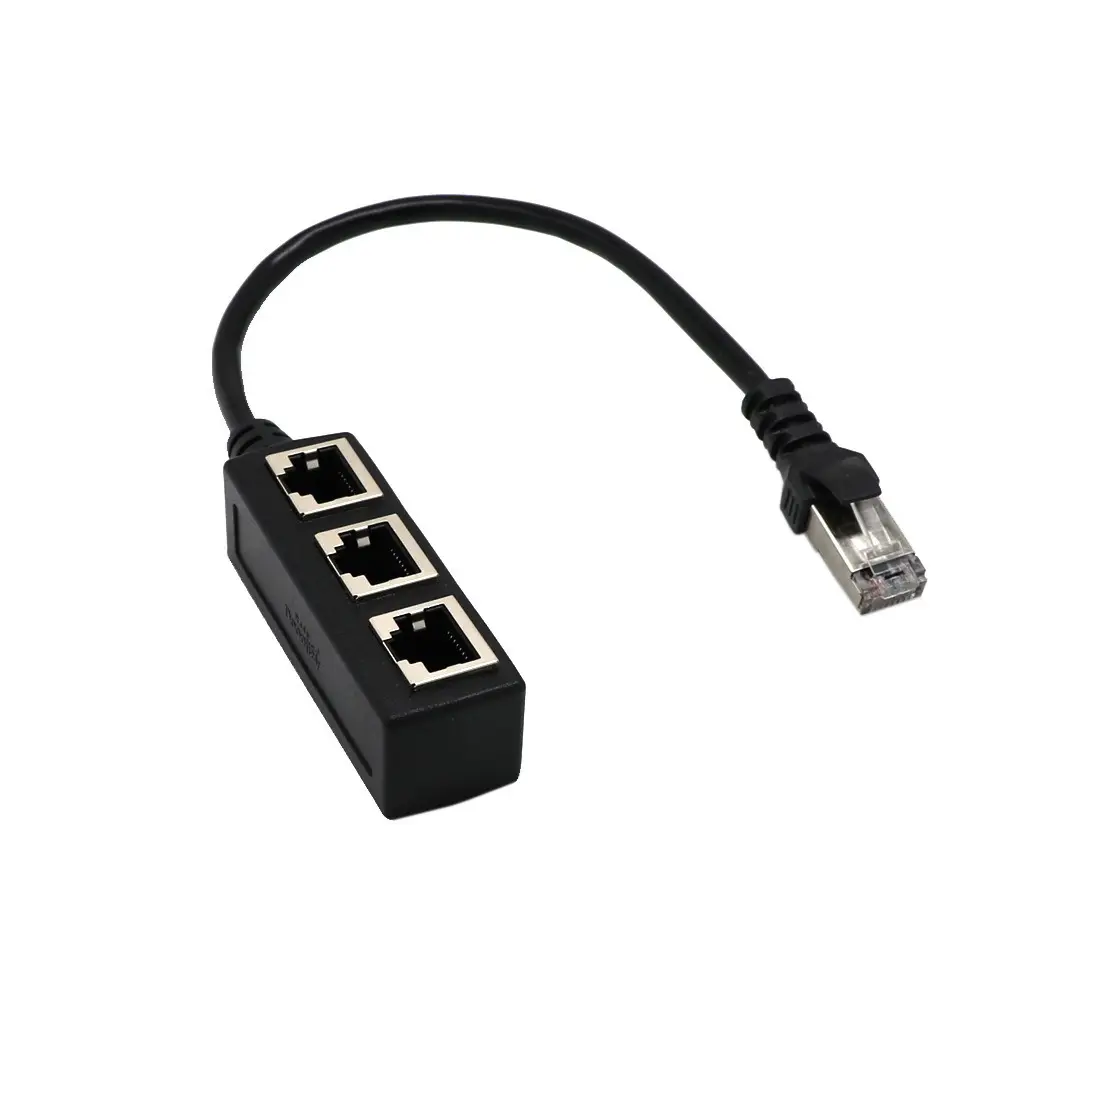 RJ45 1 To 3 Port Male To Female LAN Ethernet Splitter Adapter Cable Network LAN Connector